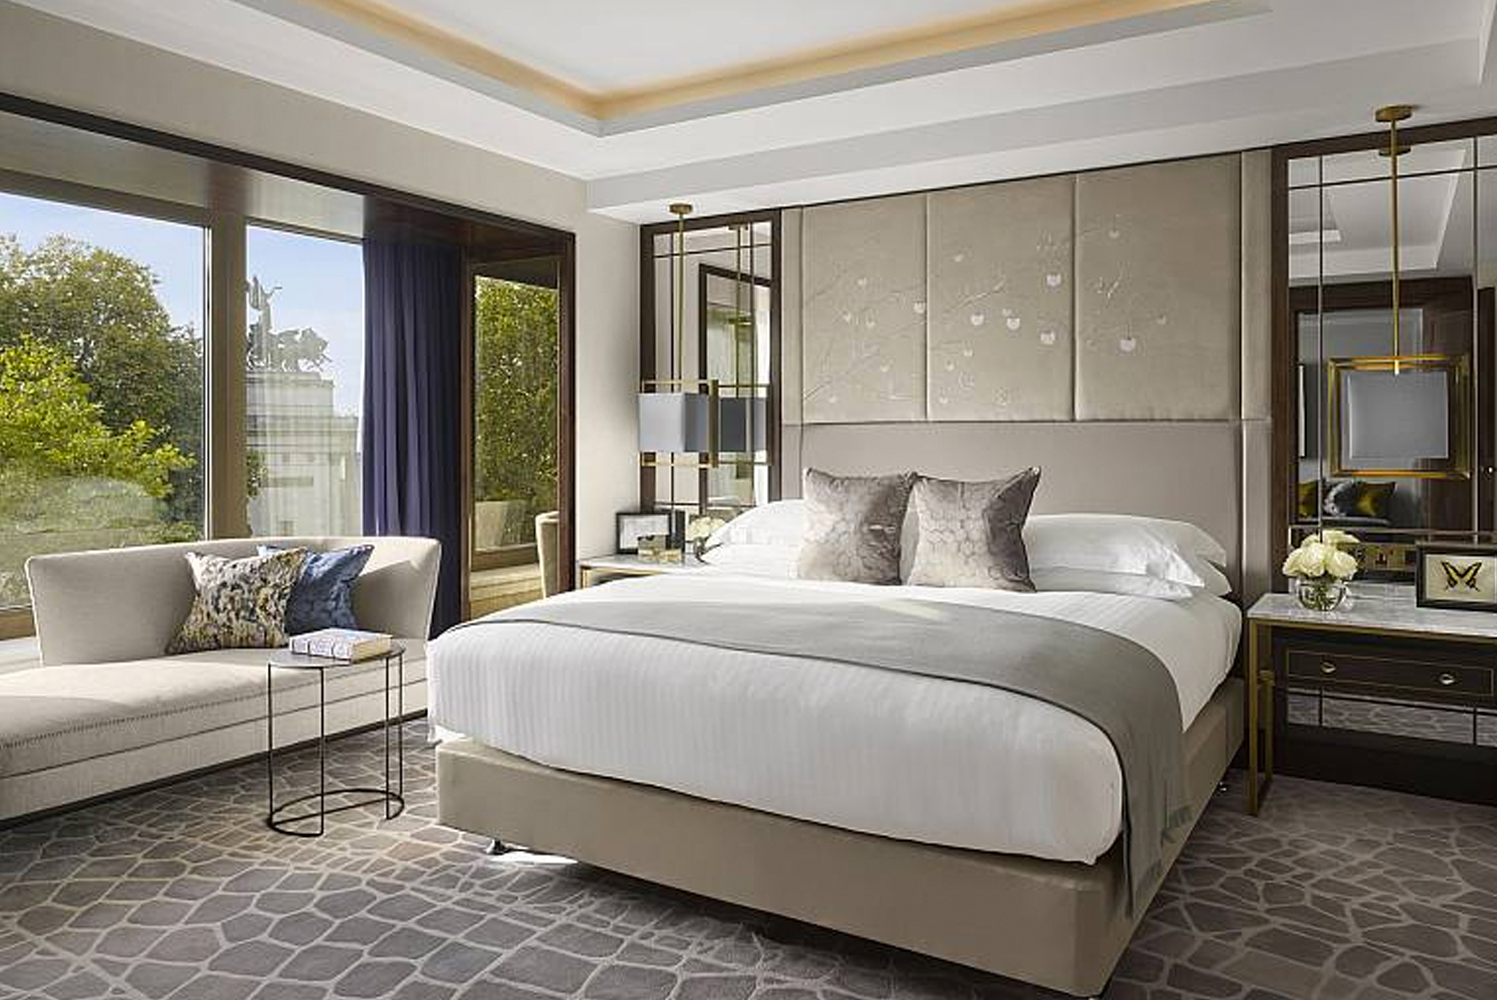 InterContinental London Park Lane launched The Capital Suite the first business suite of its kind that allows various areas 